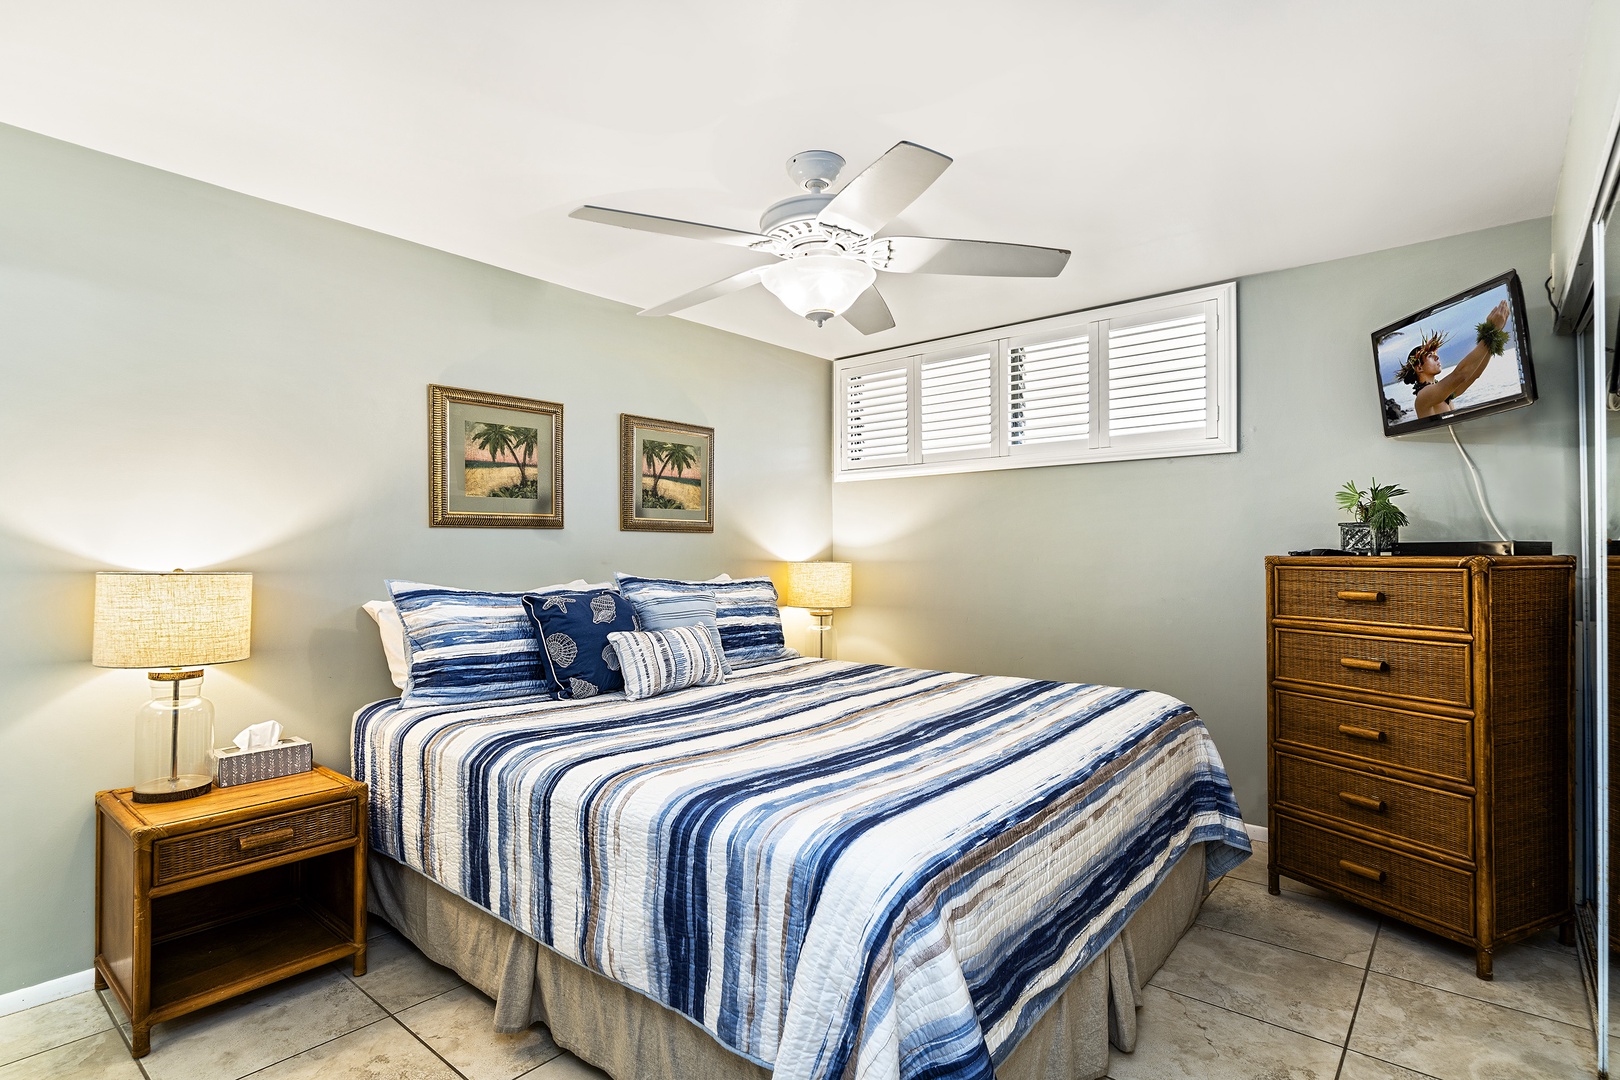 Kailua Kona Vacation Rentals, Sea Village 1105 - Primary bedroom equipped with King sized bed